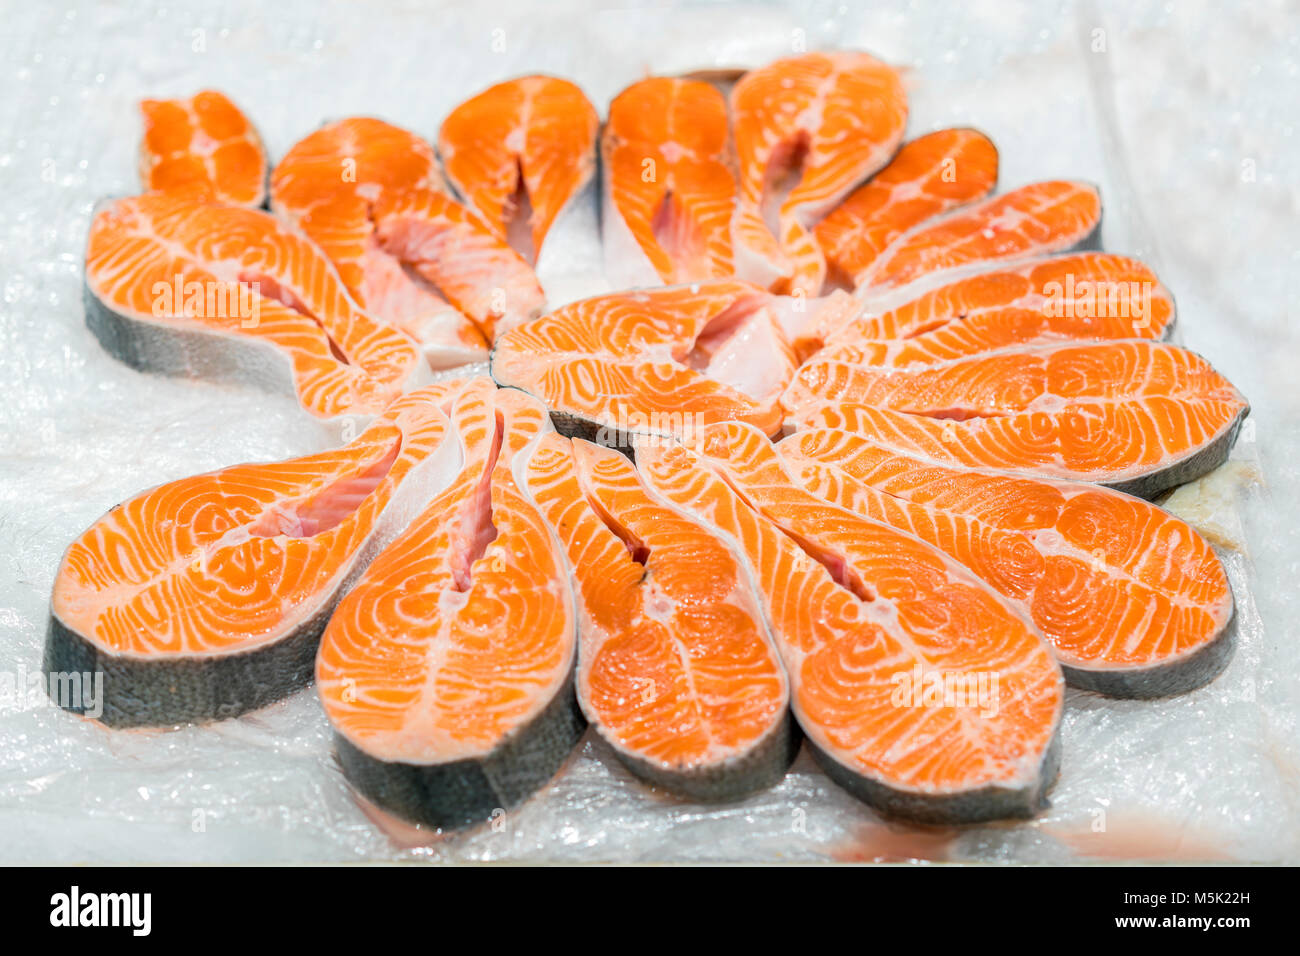 The big pieces of red fish on ice in the fish market. Stock Photo